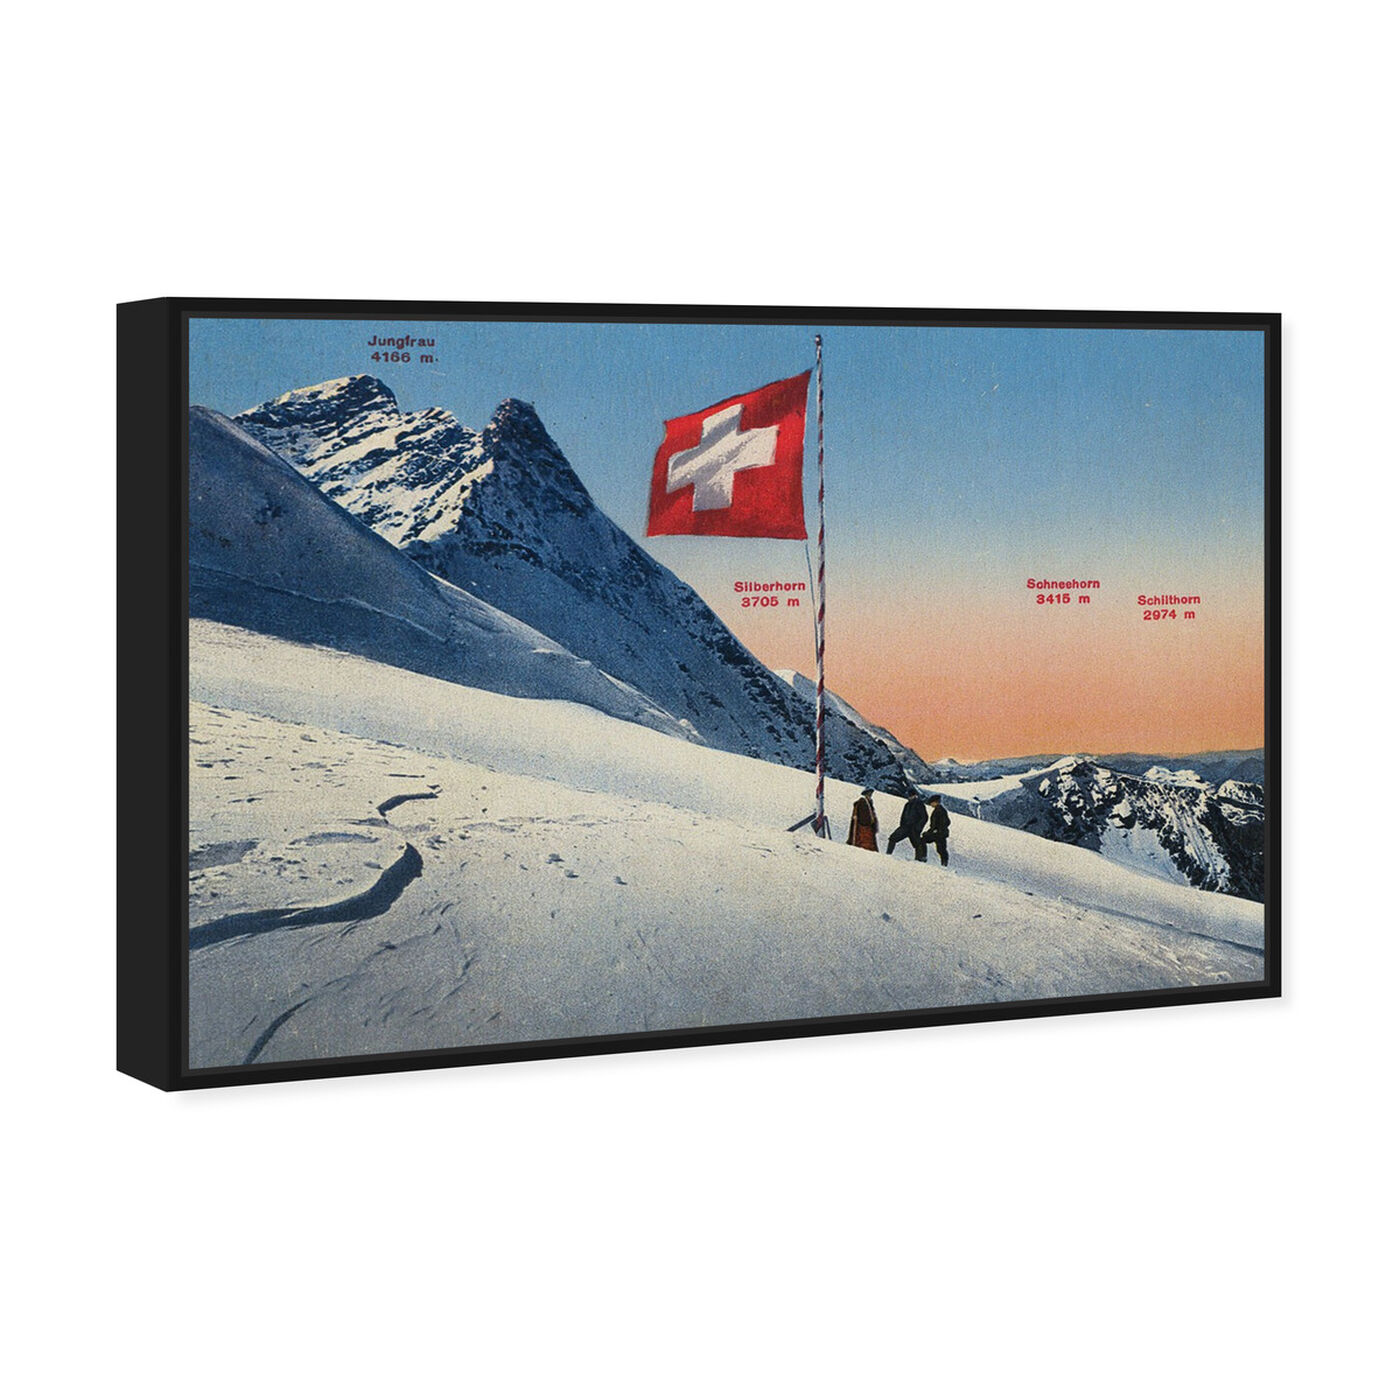 Angled view of Jungfrau featuring sports and teams and skiing art.